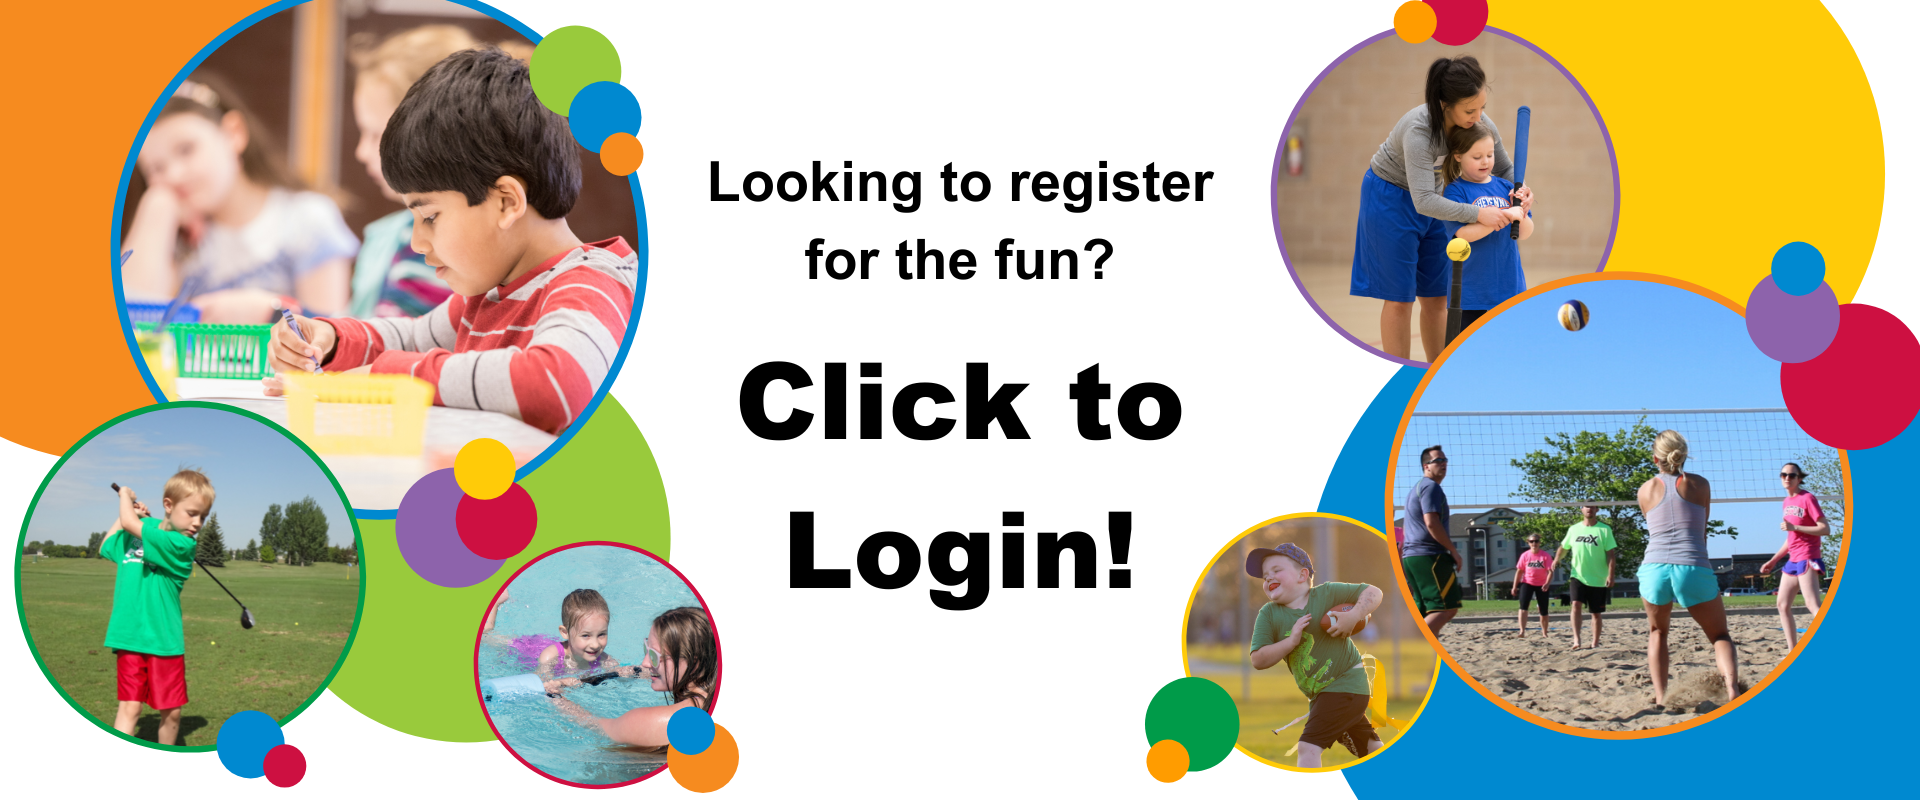 This image shows a graphic of "Looking to register for the fun? Click to Login!" with photos of Fargo Parks programming.